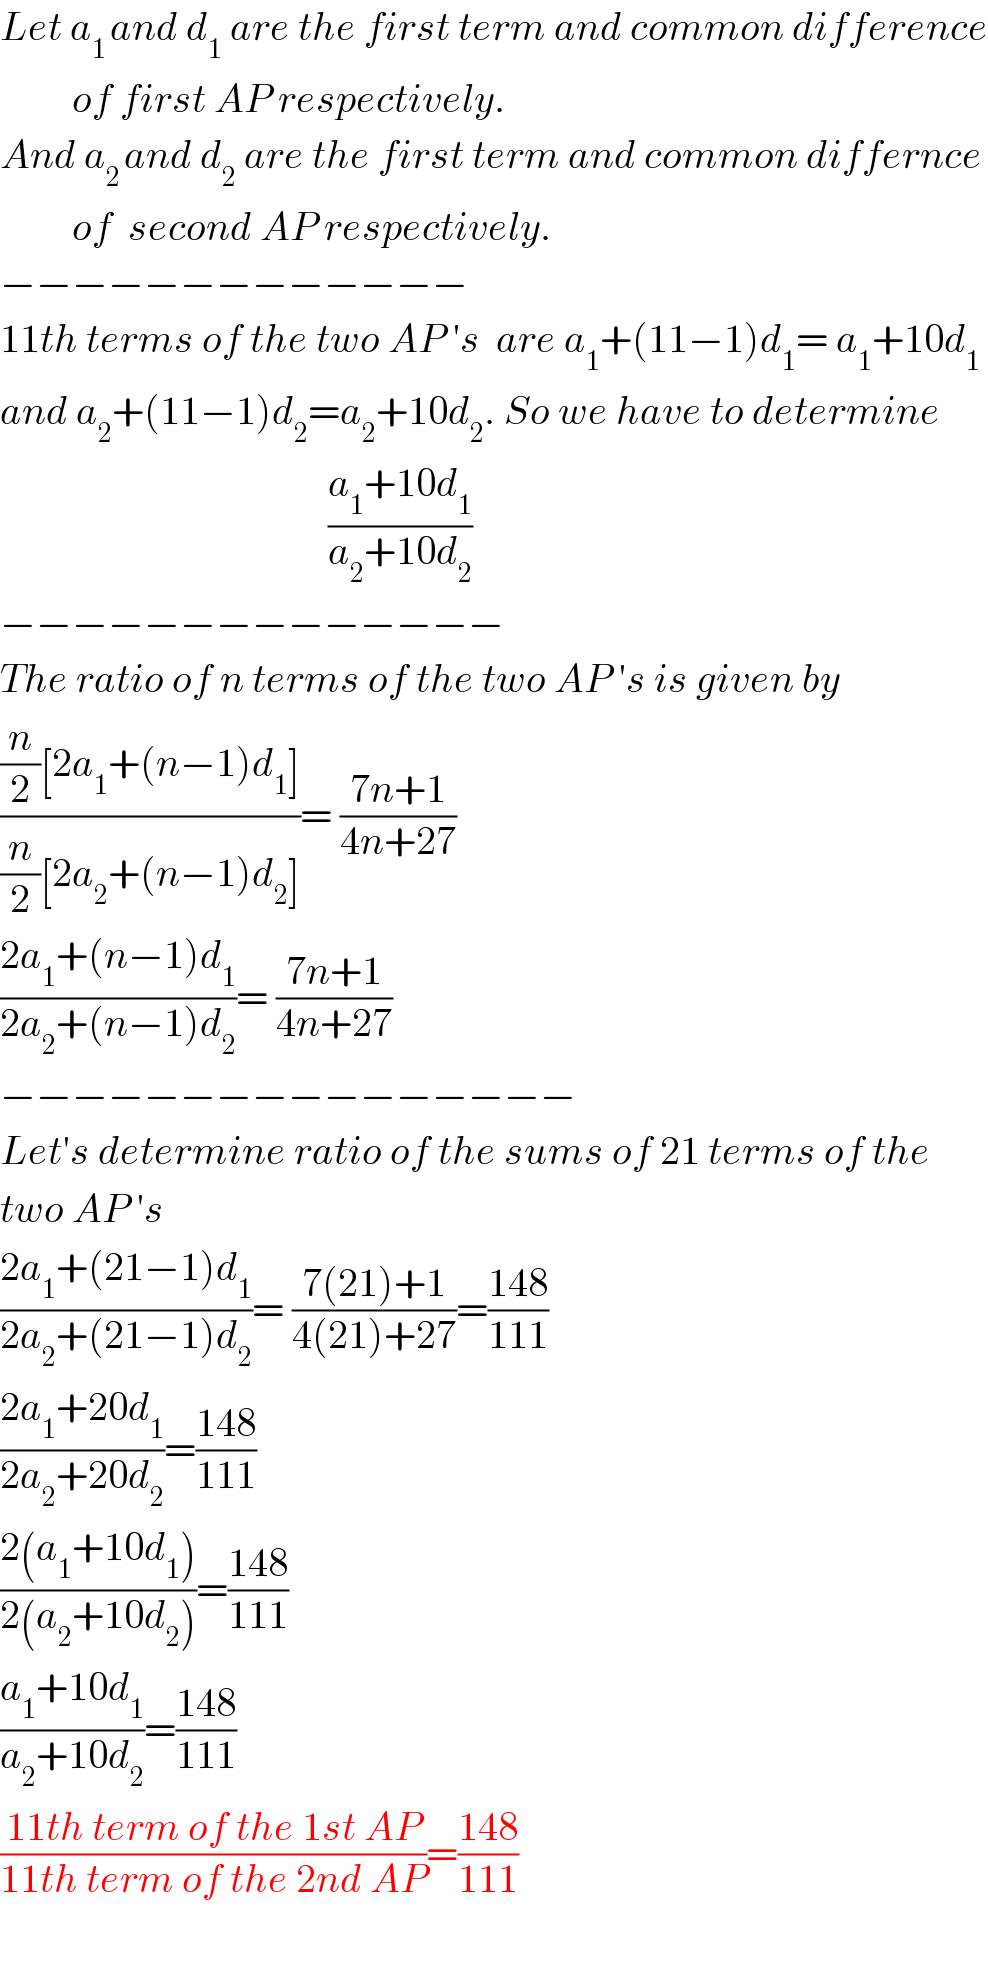 Let a_(1 ) and d_1  are the first term and common difference           of first AP respectively.  And a_(2 ) and d_2  are the first term and common differnce           of  second AP respectively.  −−−−−−−−−−−−−  11th terms of the two AP ′s  are a_1 +(11−1)d_1 = a_1 +10d_1   and a_2 +(11−1)d_2 =a_2 +10d_2 . So we have to determine                                            ((a_1 +10d_1 )/(a_2 +10d_2 ))  −−−−−−−−−−−−−−  The ratio of n terms of the two AP ′s is given by  (((n/2)[2a_1 +(n−1)d_1 ])/((n/2)[2a_2 +(n−1)d_2 ]))= ((7n+1)/(4n+27))  ((2a_1 +(n−1)d_1 )/(2a_2 +(n−1)d_2 ))= ((7n+1)/(4n+27))  −−−−−−−−−−−−−−−−  Let′s determine ratio of the sums of 21 terms of the  two AP ′s  ((2a_1 +(21−1)d_1 )/(2a_2 +(21−1)d_2 ))= ((7(21)+1)/(4(21)+27))=((148)/(111))  ((2a_1 +20d_1 )/(2a_2 +20d_2 ))=((148)/(111))  ((2(a_1 +10d_1 ))/(2(a_2 +10d_2 )))=((148)/(111))  ((a_1 +10d_1 )/(a_2 +10d_2 ))=((148)/(111))  ((11th term of the 1st AP)/(11th term of the 2nd AP))=((148)/(111))    